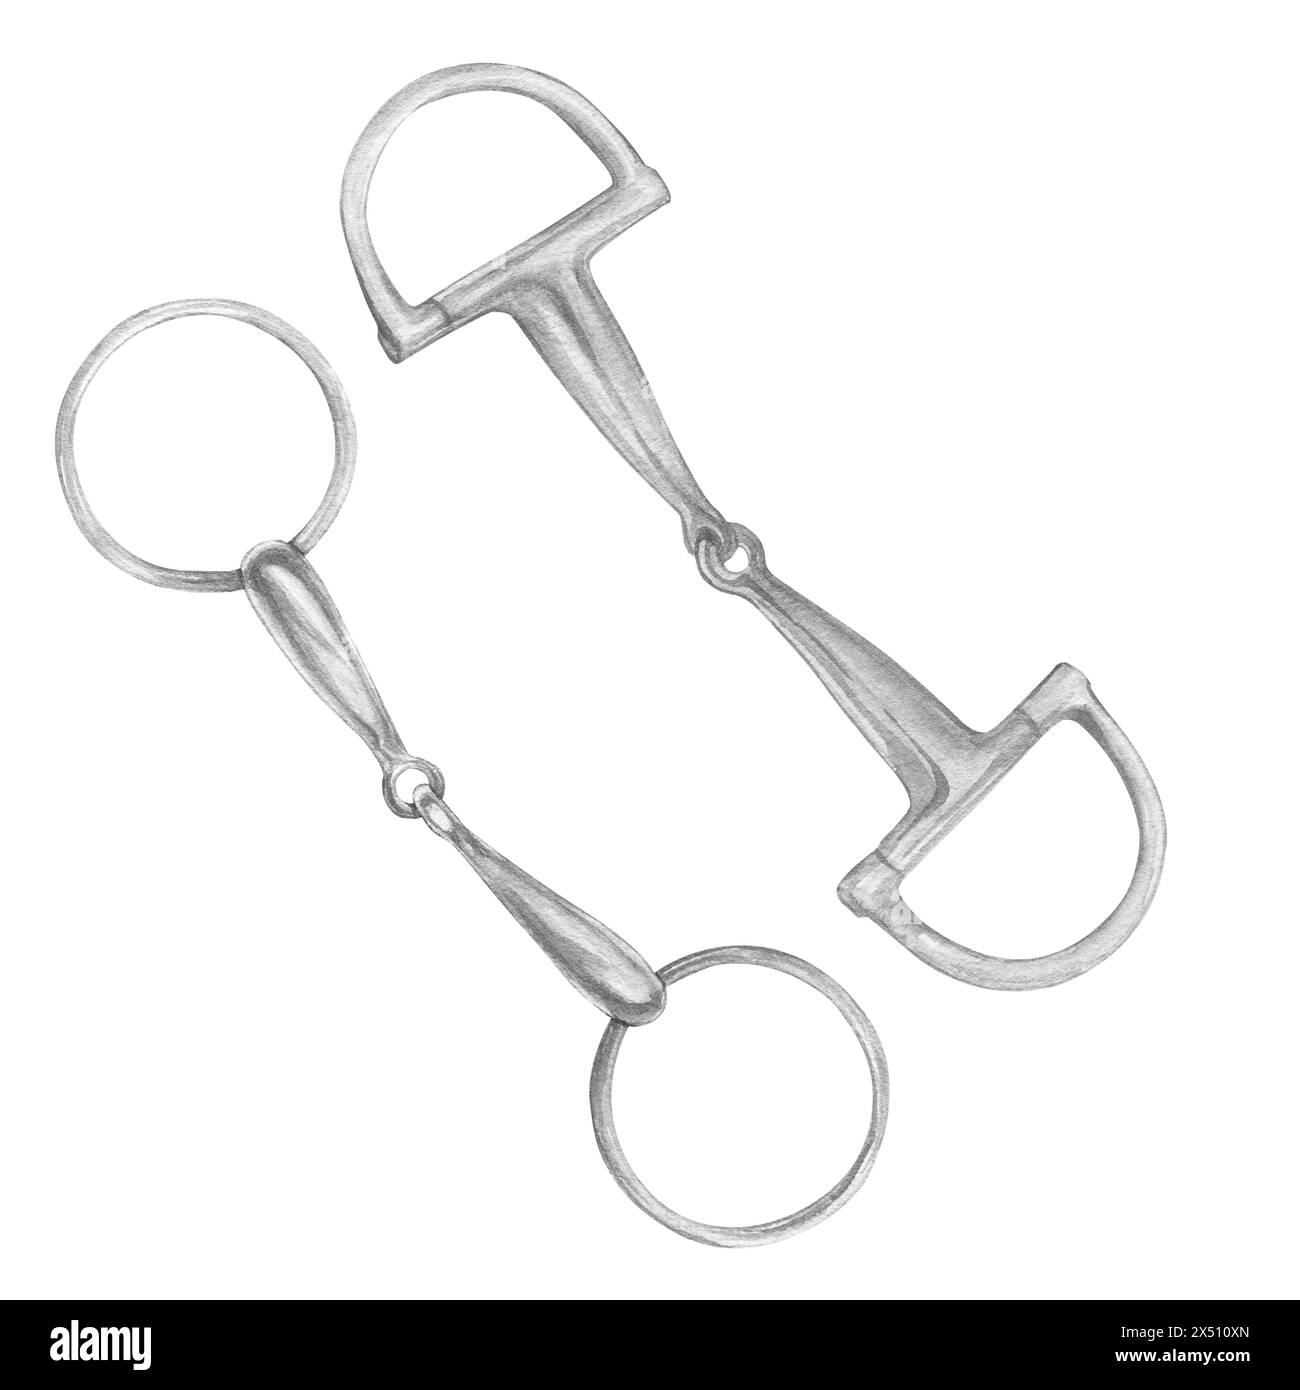 Watercolor illustration of silver snaffle, bit with D-Ring and circle rings. Equipment for horse riding metal set. Isolated. For cards, prints, decor Stock Photo